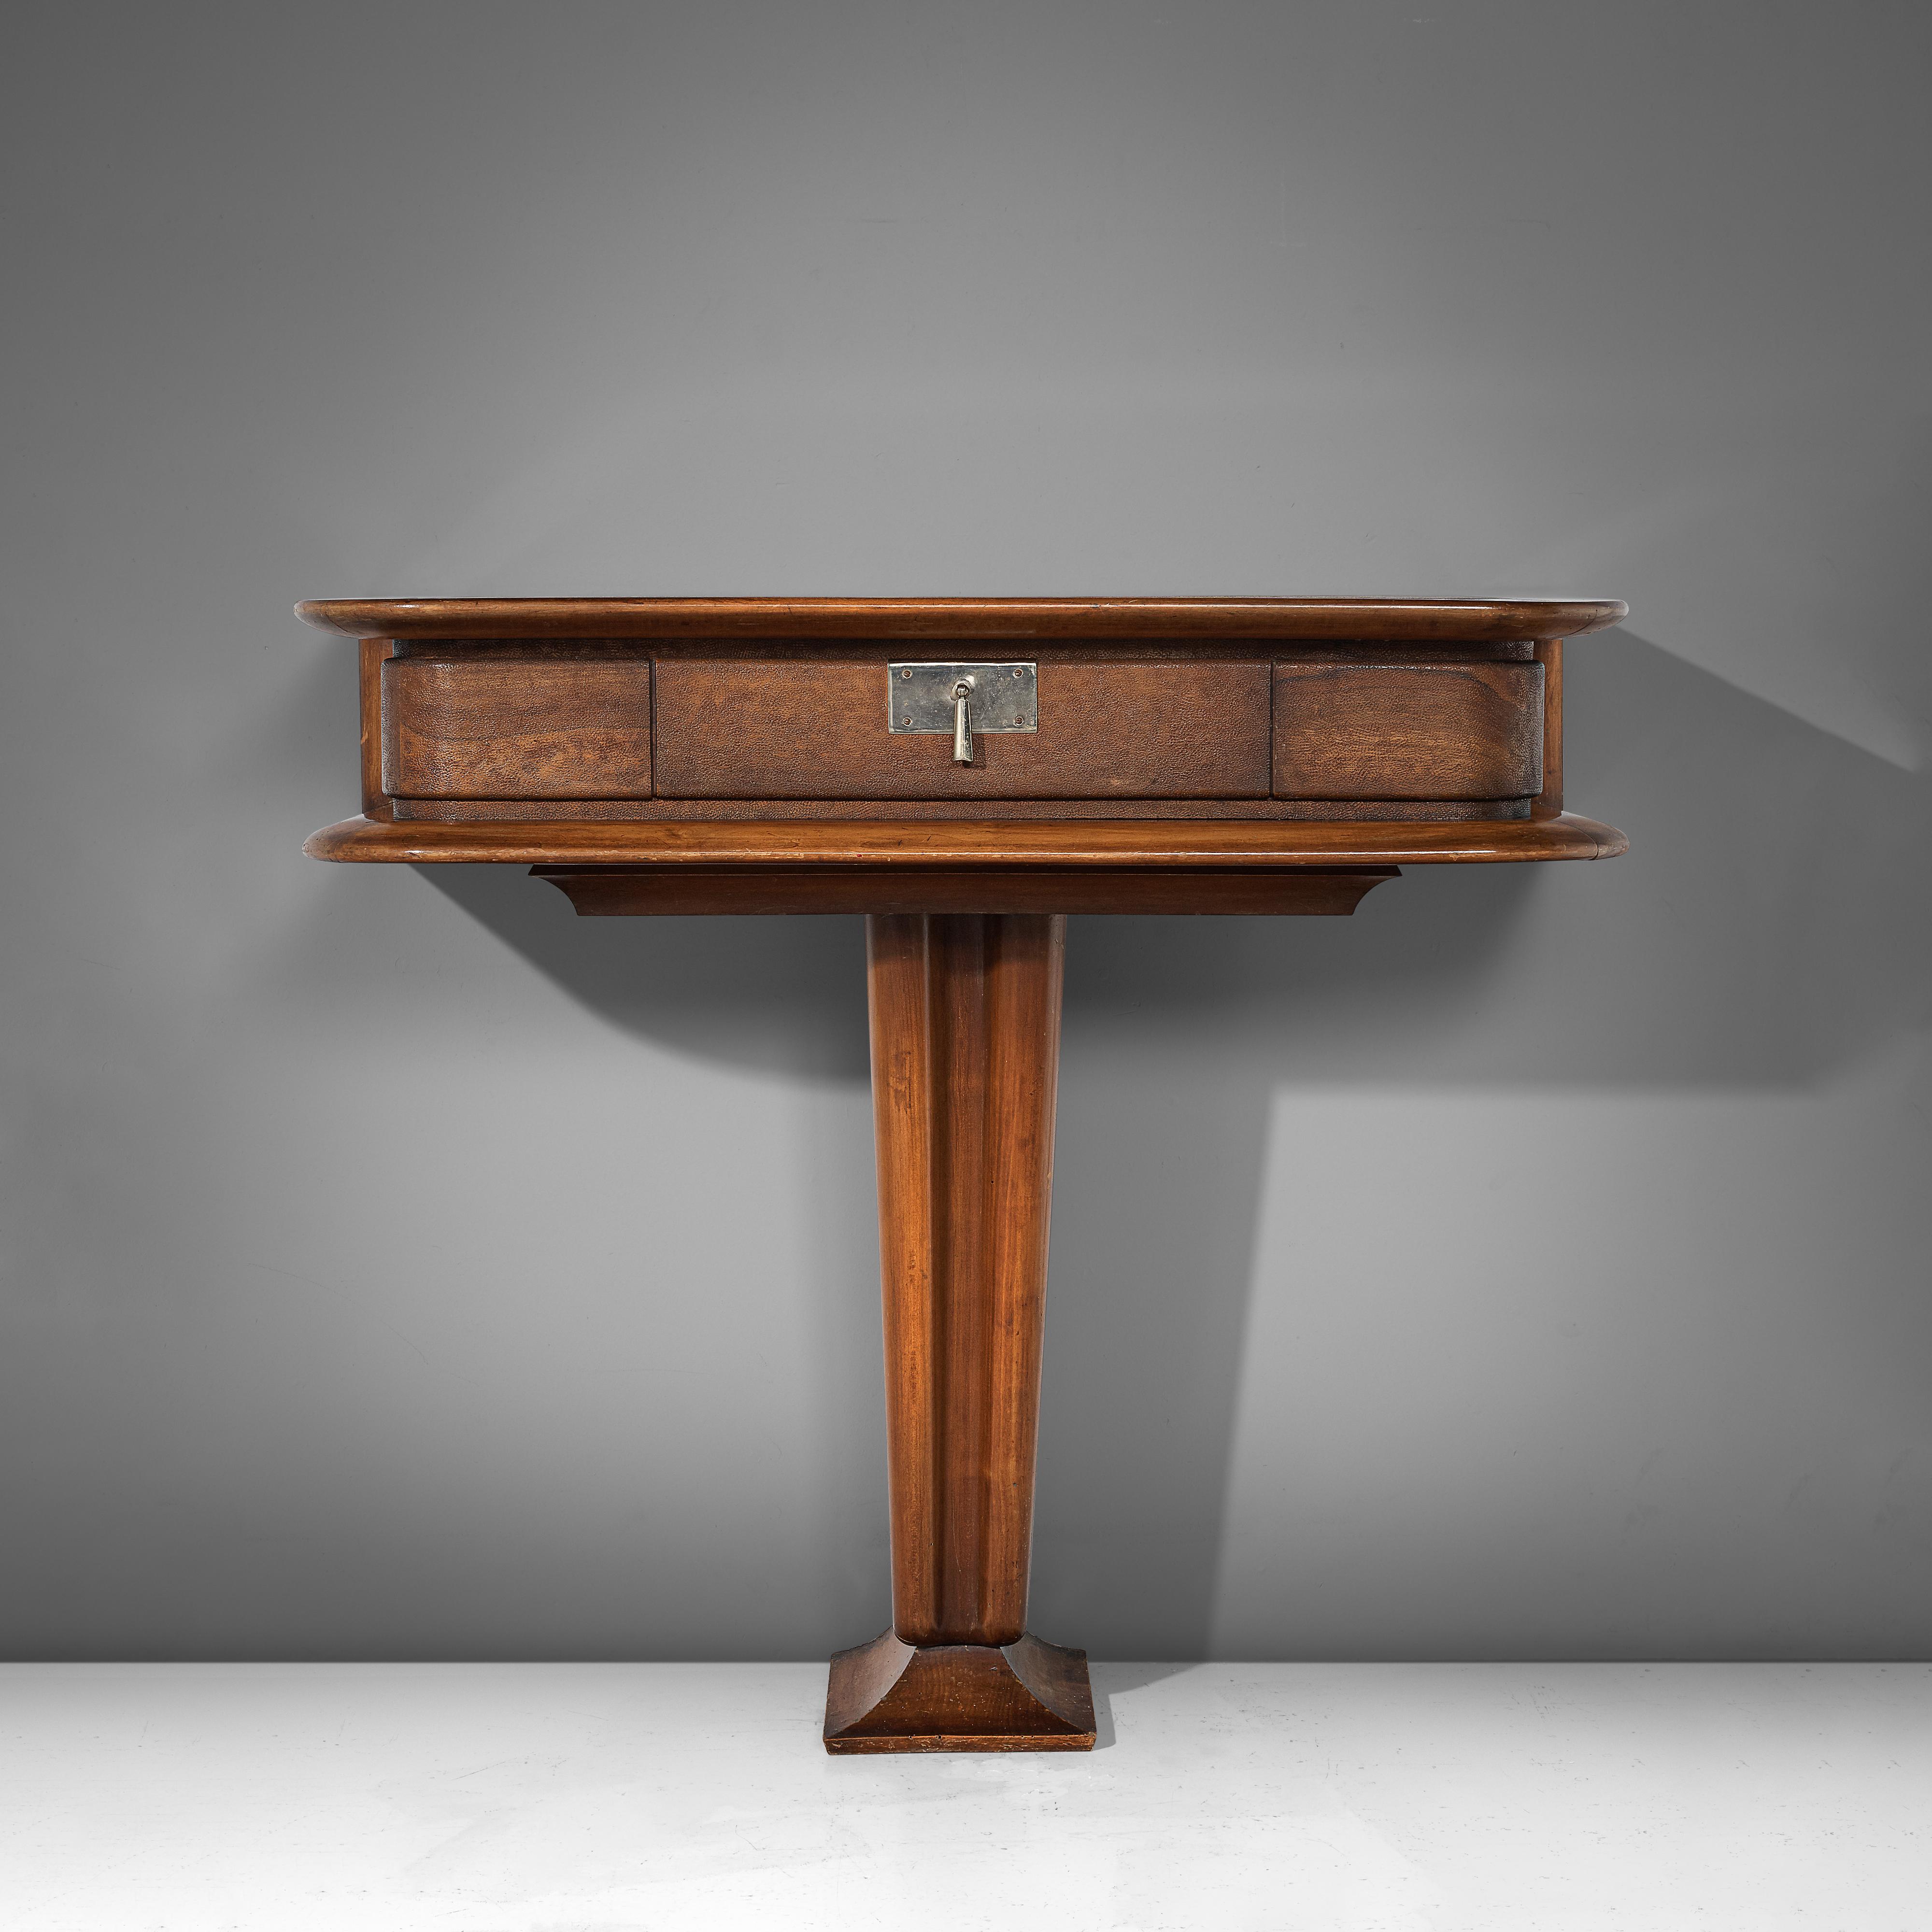 Vittorio Valabrega, console with drawer, walnut, leather, metal, Italy, 1940s

This console by the Italian designer Vittorio Valabrega is sculptural and elegant. Note the details in the base or the fine lines that surround the drawer. A metal